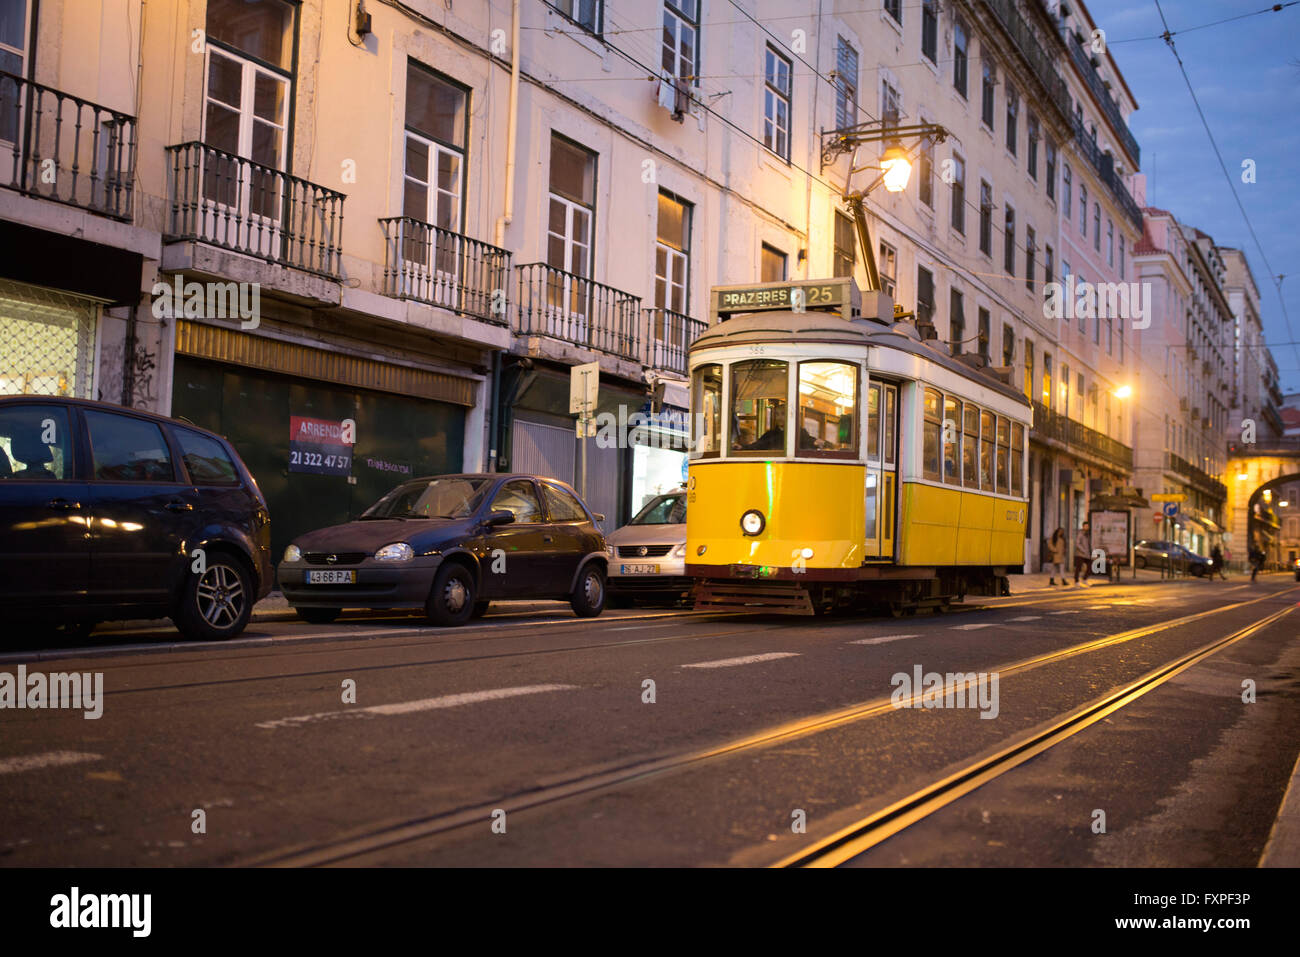 Tram in the street of Lisbon, Portugal Stock Photo